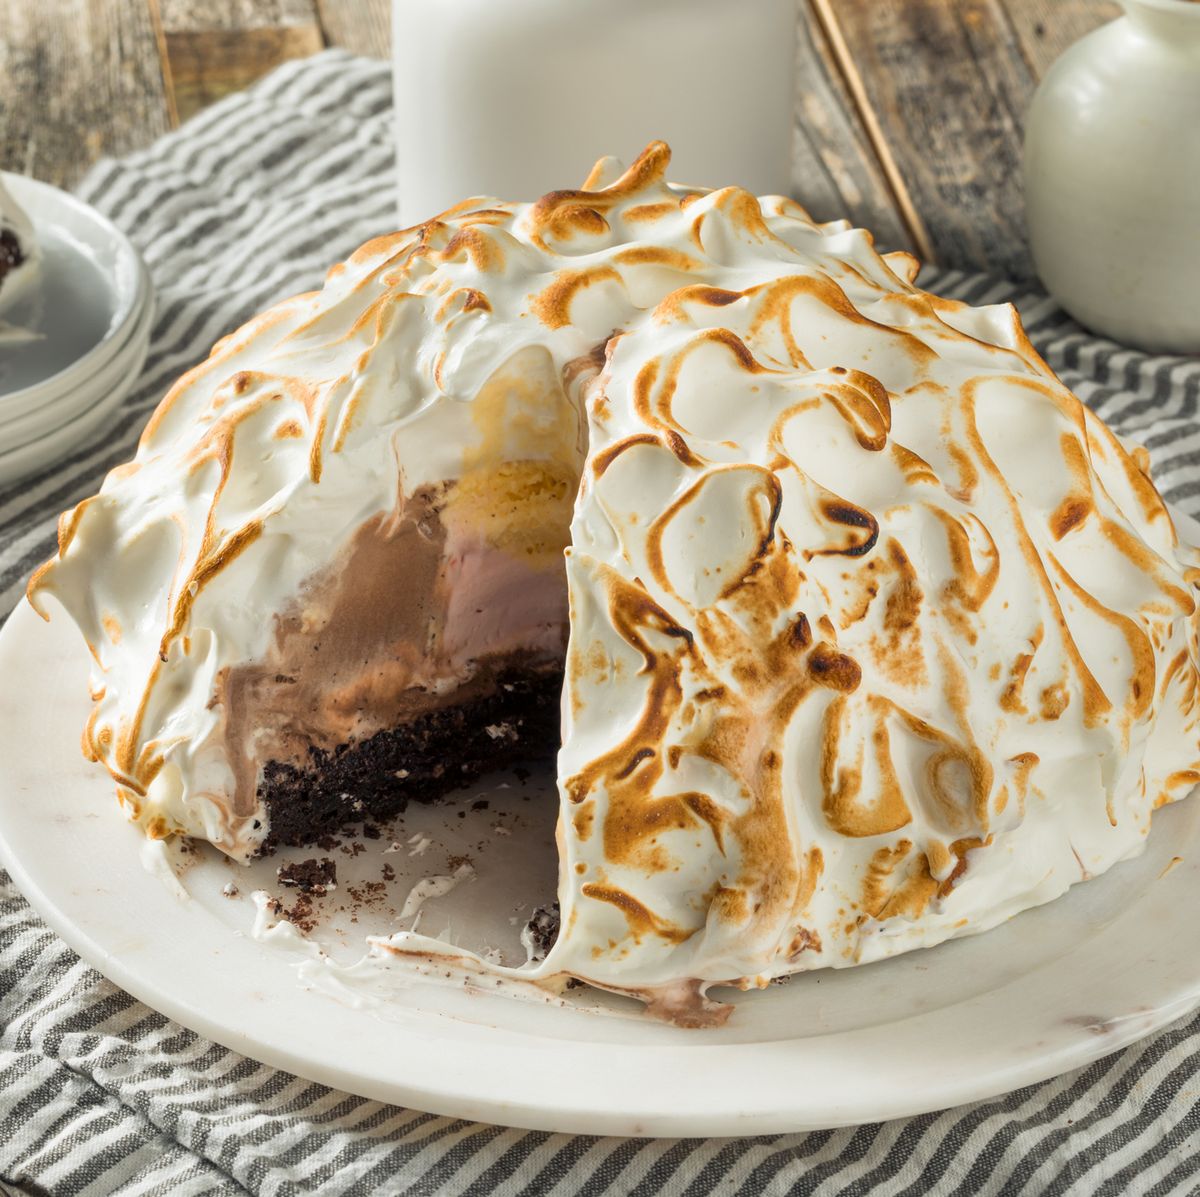 How to make the perfect baked Alaska